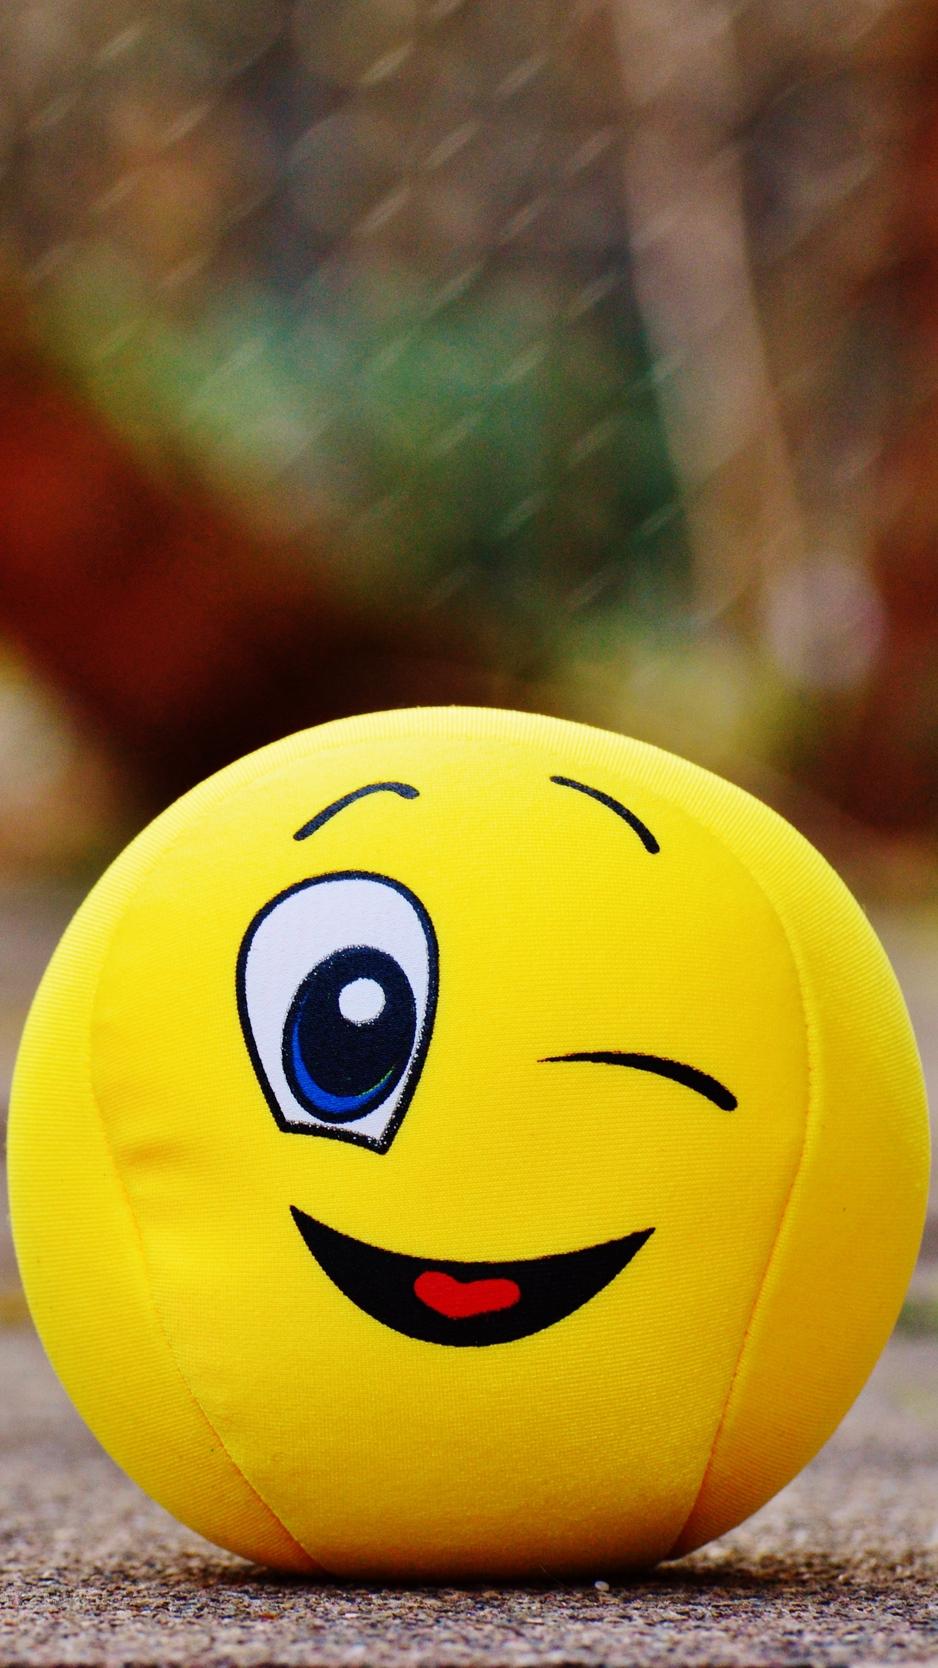 Download wallpaper 938x1668 ball, smile, happy, toy iphone 8